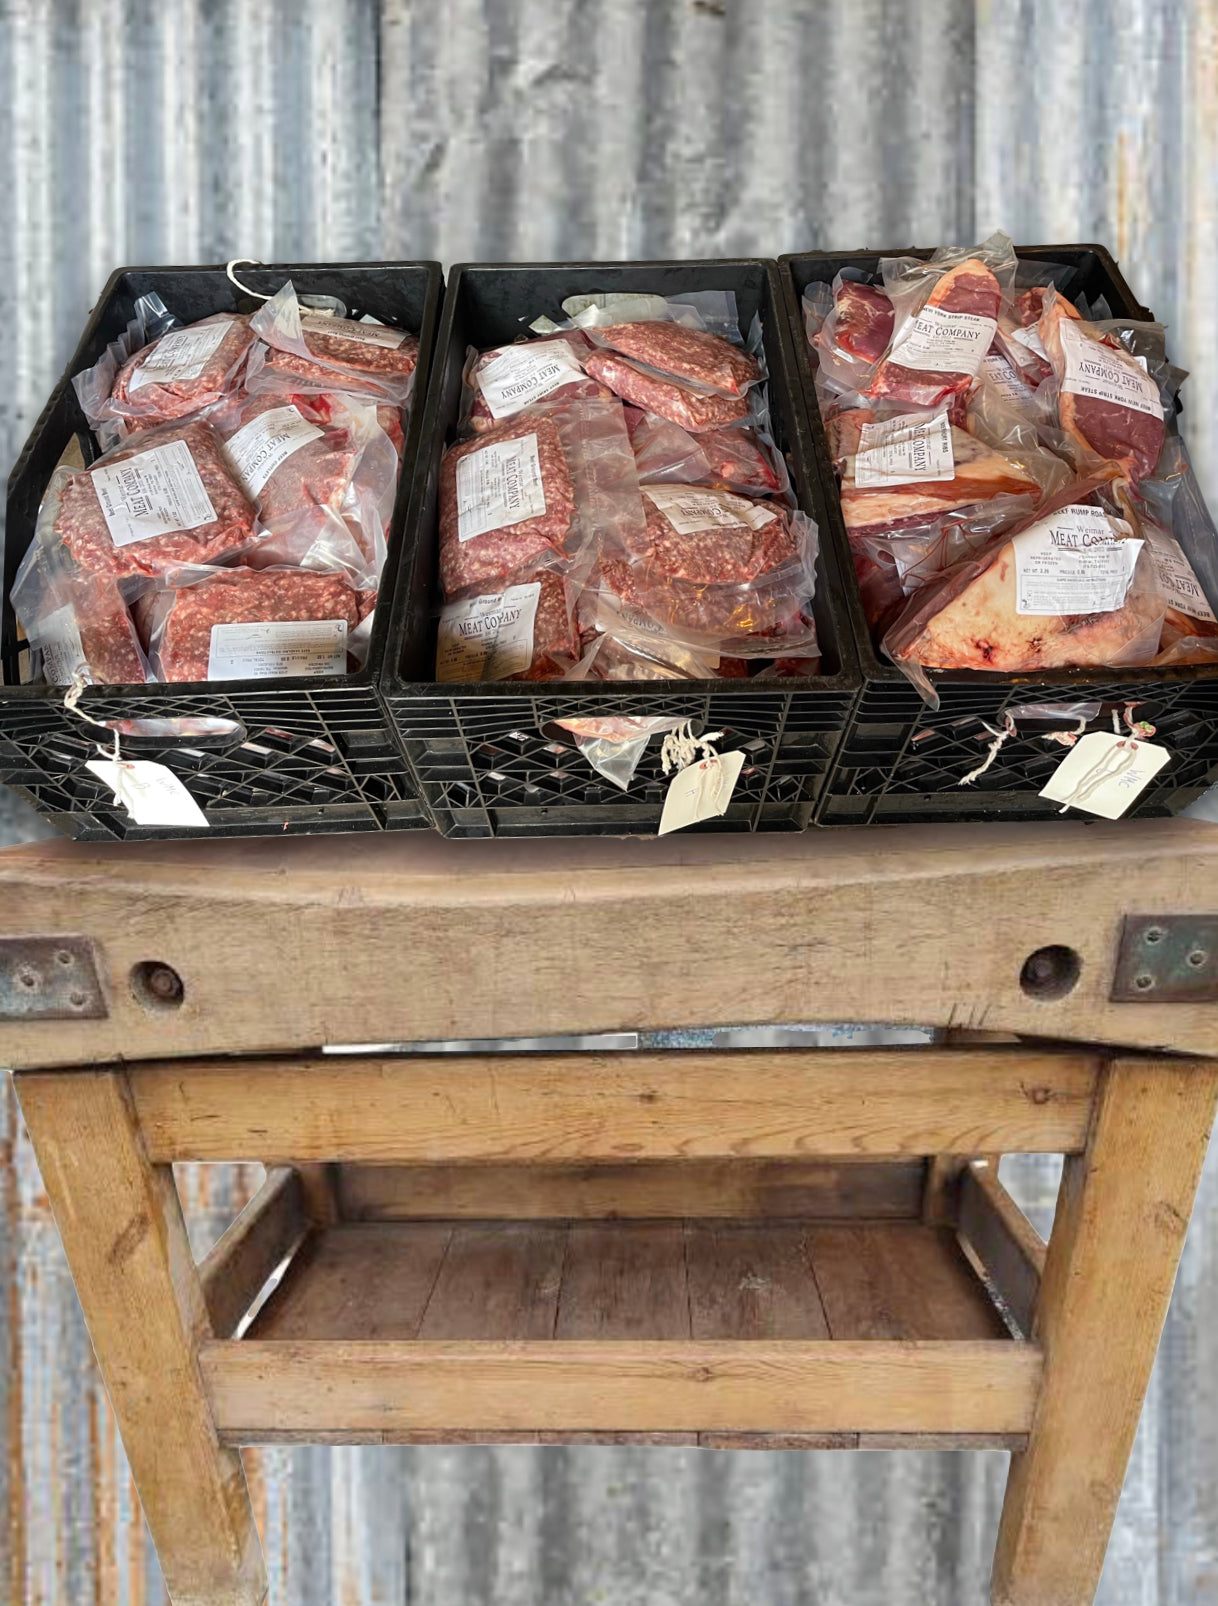 50lbs of Pasture raised, all natural, grass fed/grain finished Wagyu/Angus beef cuts!!